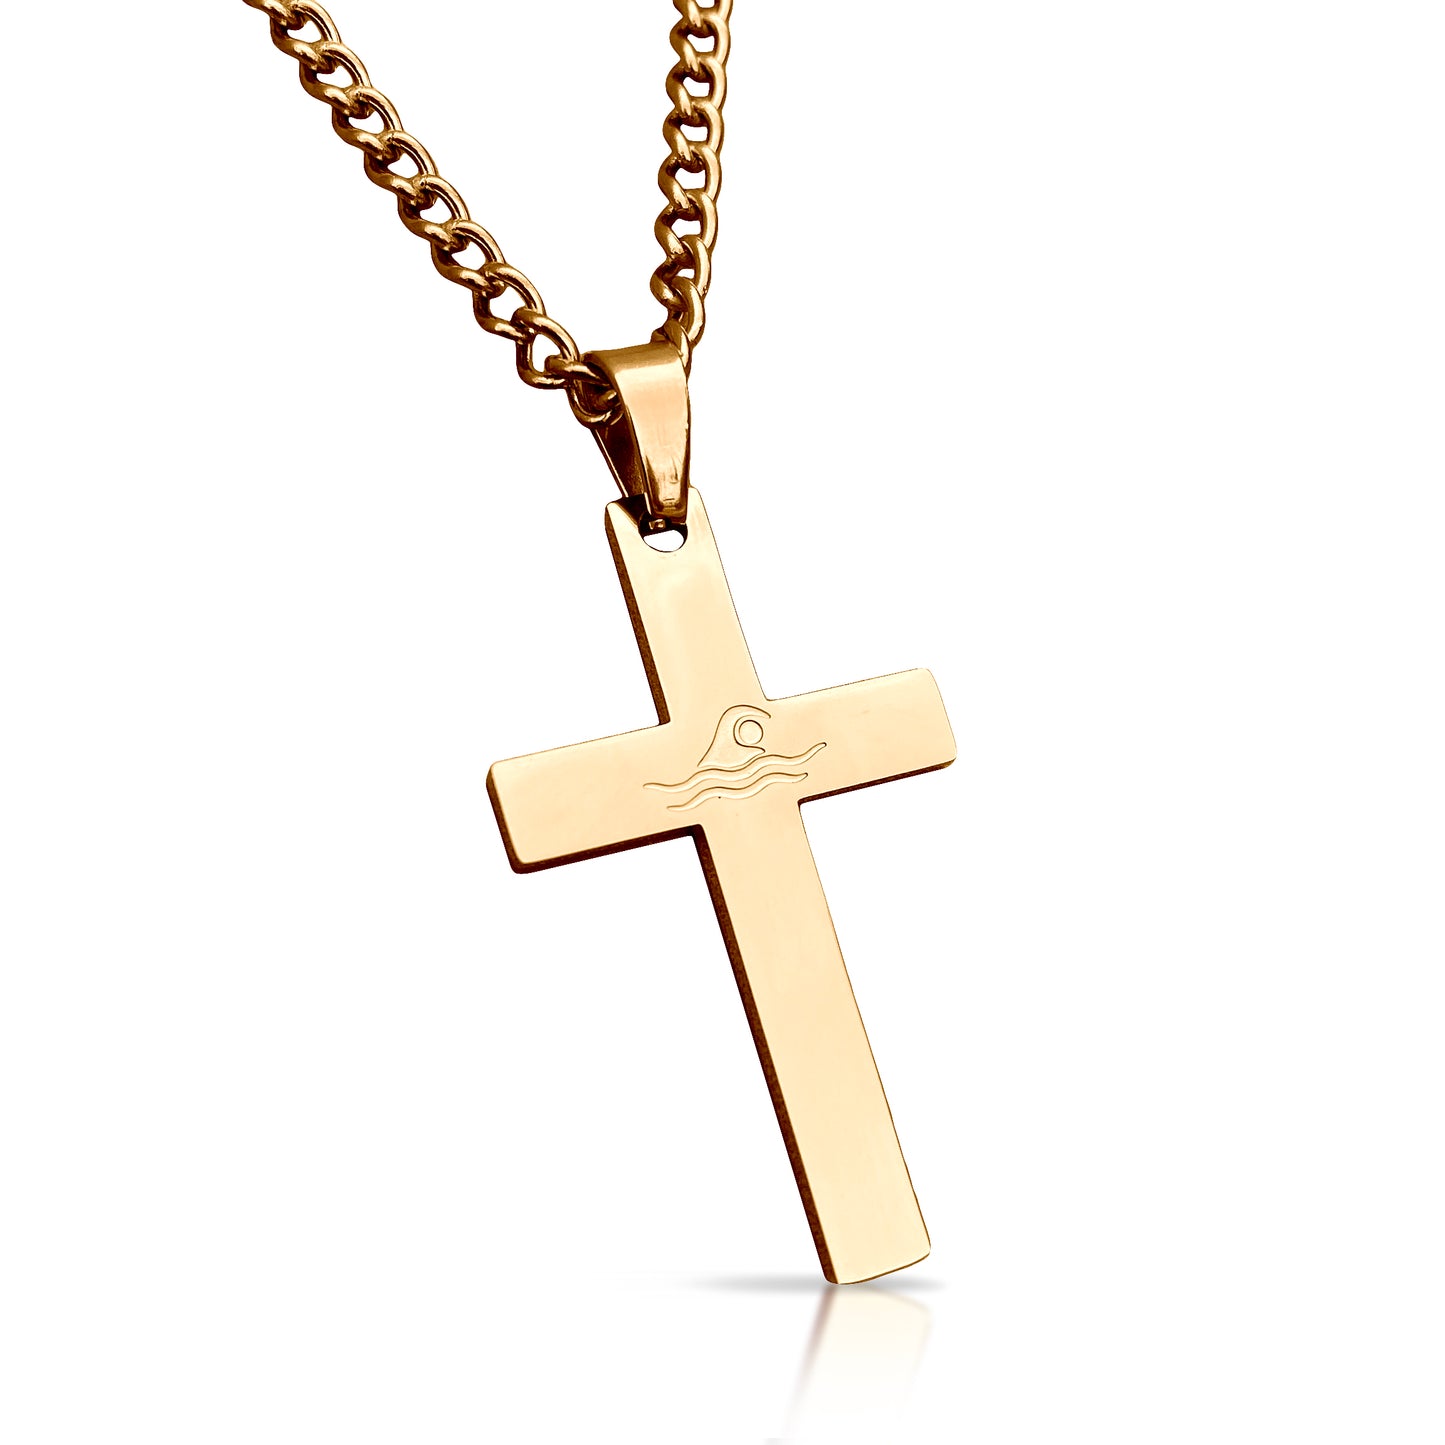 Swimming Cross Pendant With Chain Necklace - 14K Gold Plated Stainless Steel